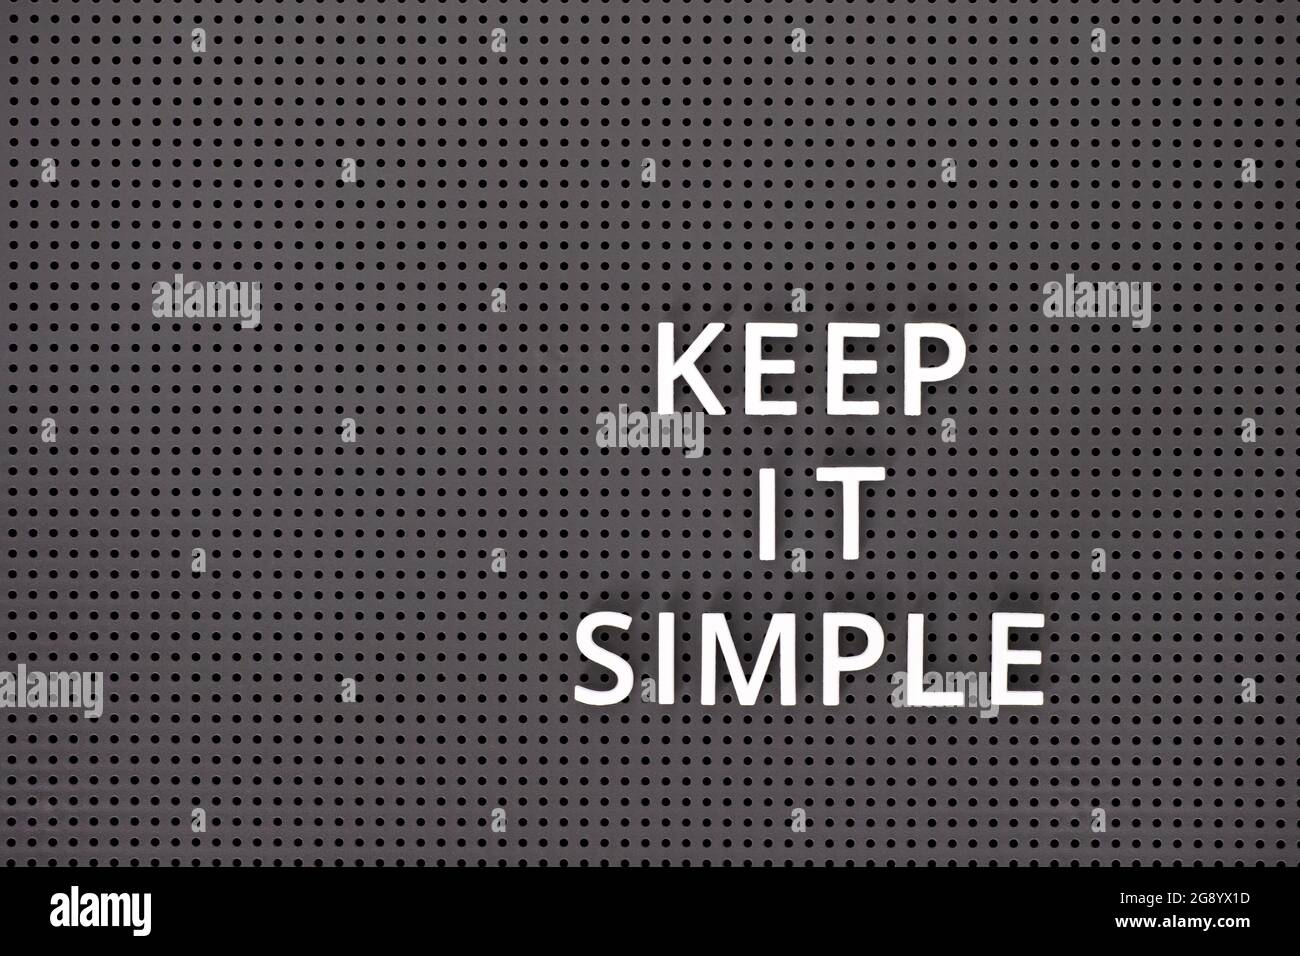 PDF]❤️DOWNLOAD⚡️ Keep it Simple with Black: A Solid and